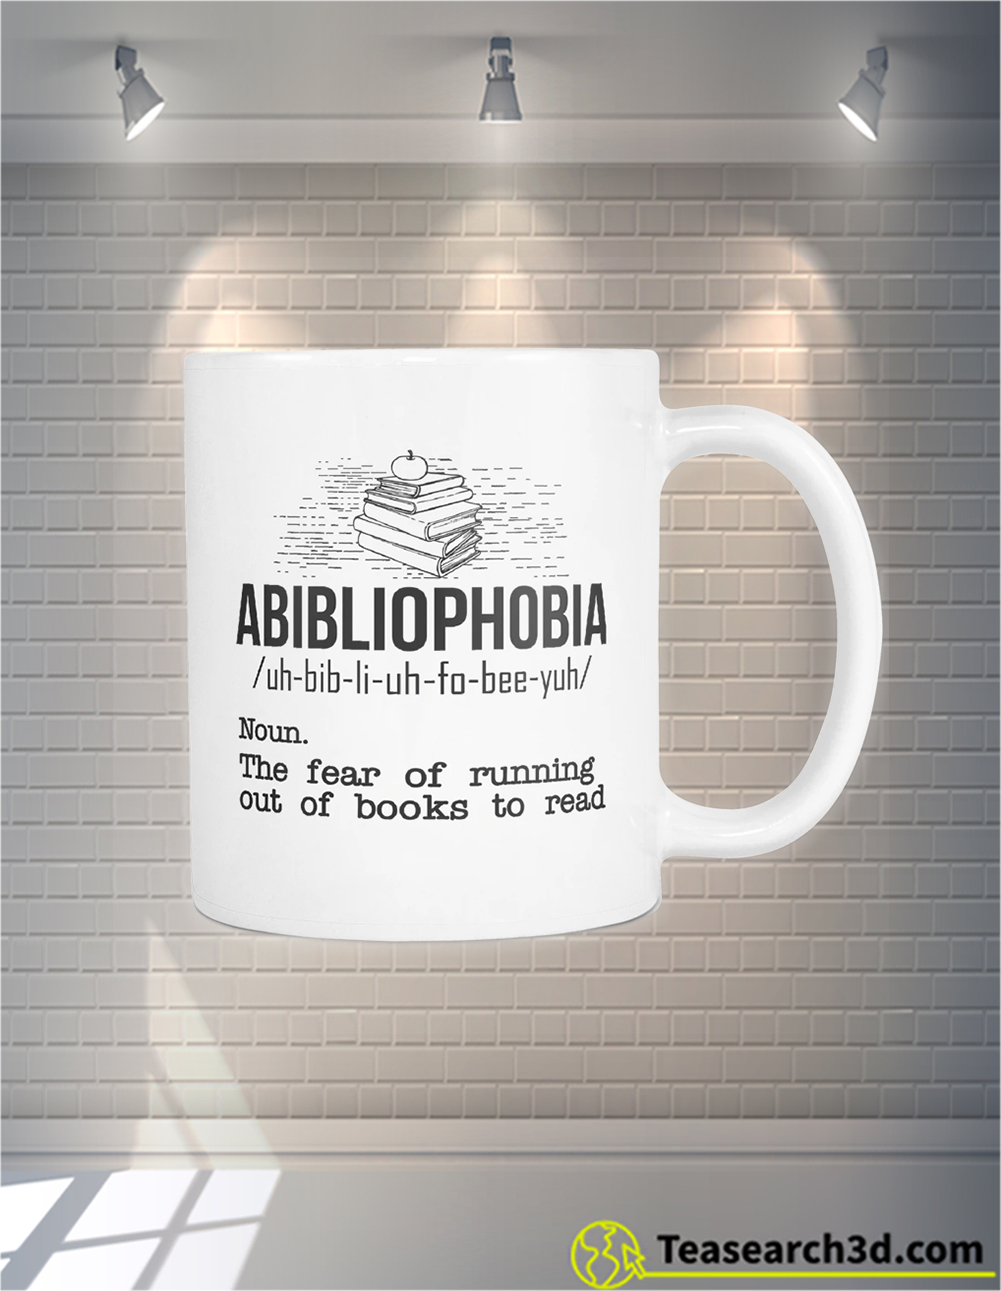 Abibliophobia definition the fear of running out of books to read mug